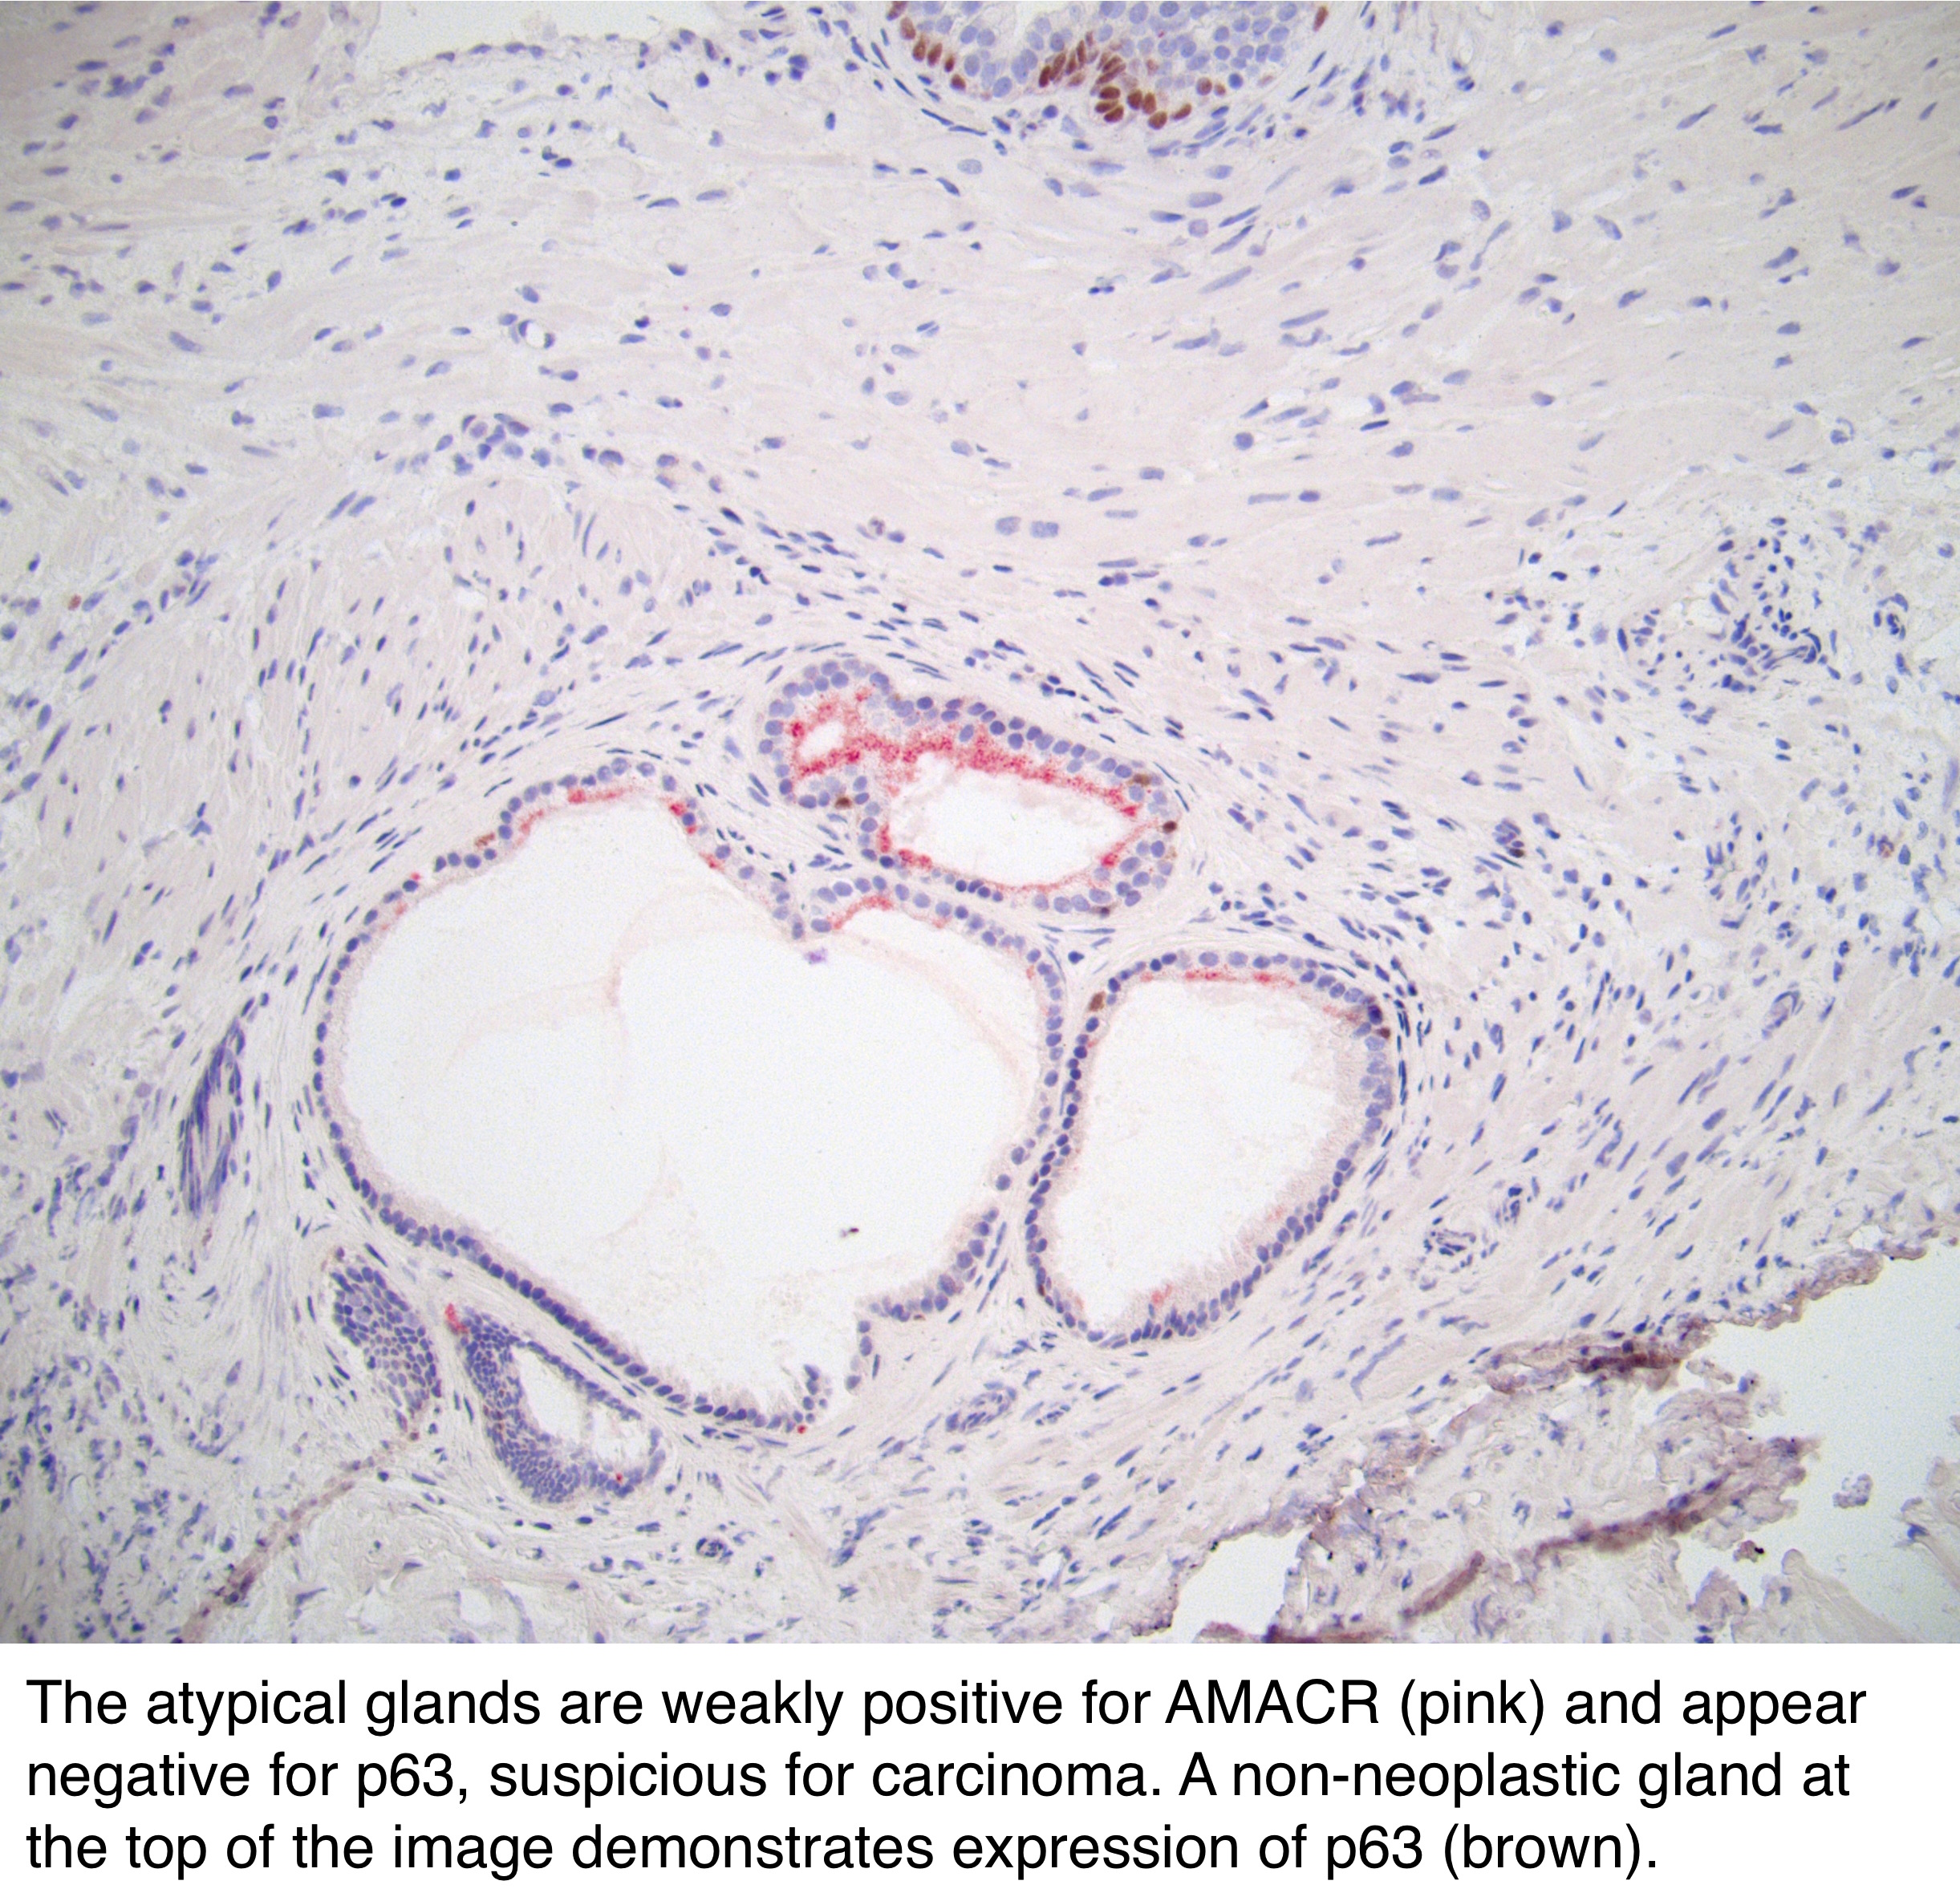 asap prostate pathology outlines psa 40 year old